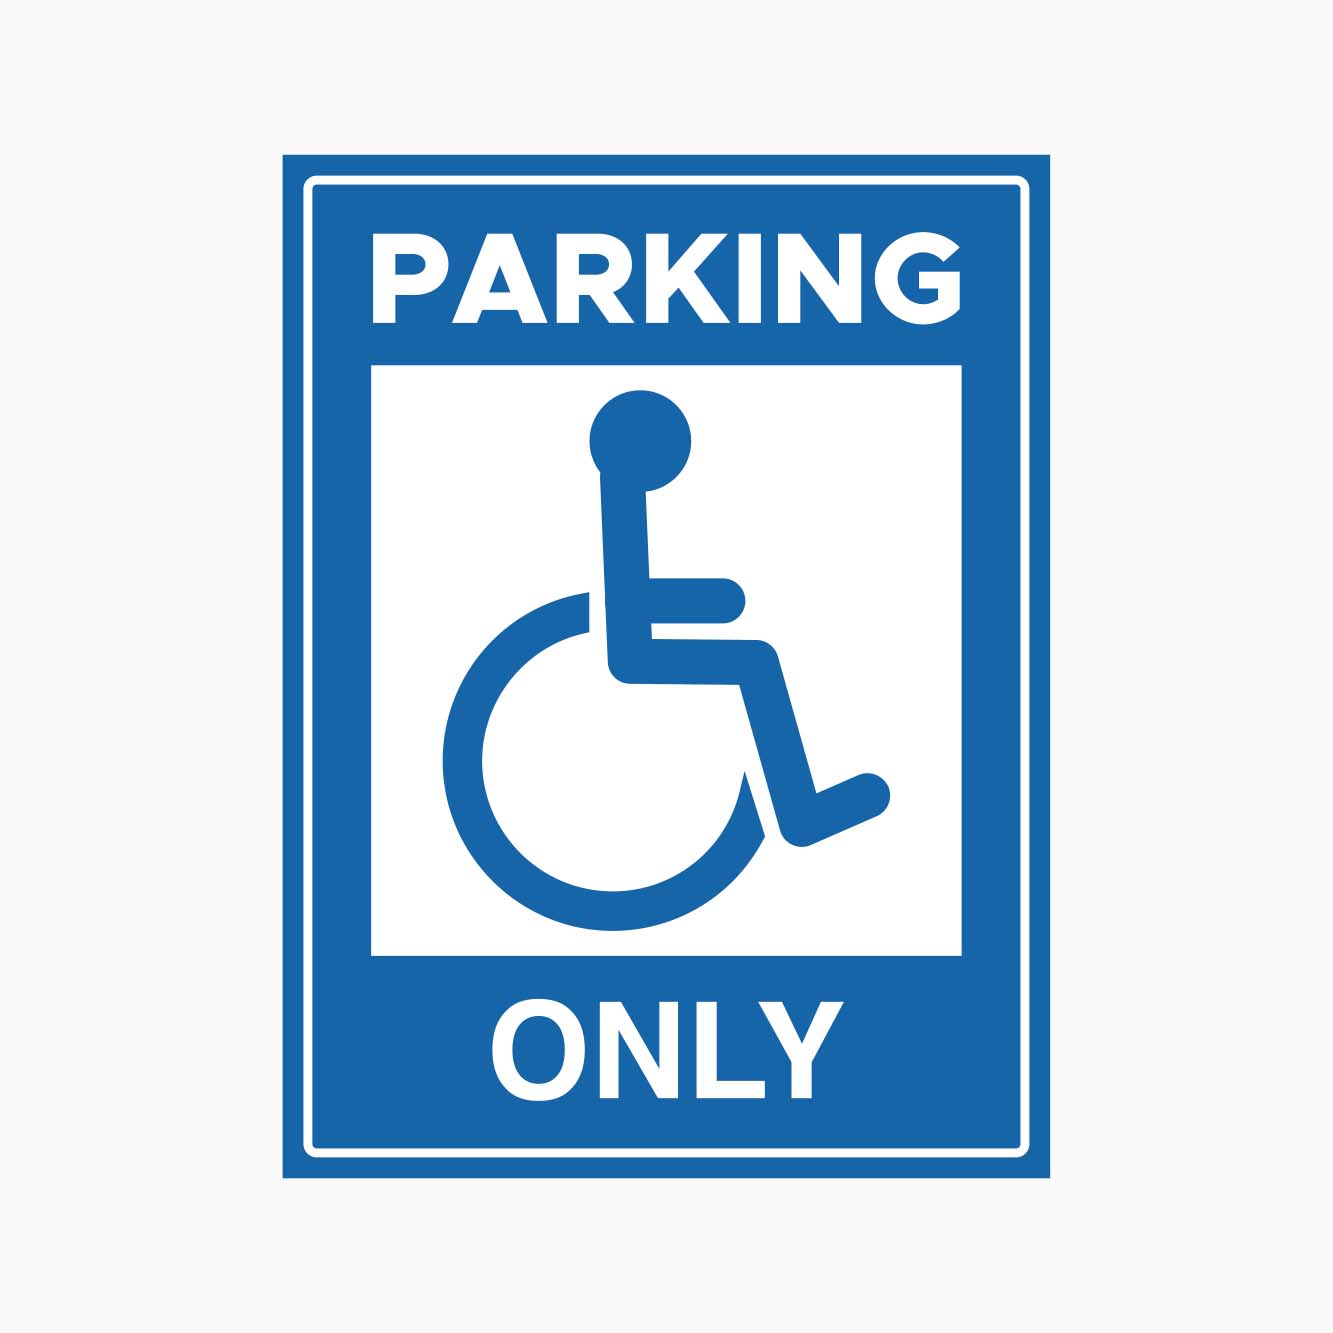 PARKING DISABLED ONLY SIGN - GET SIGNS